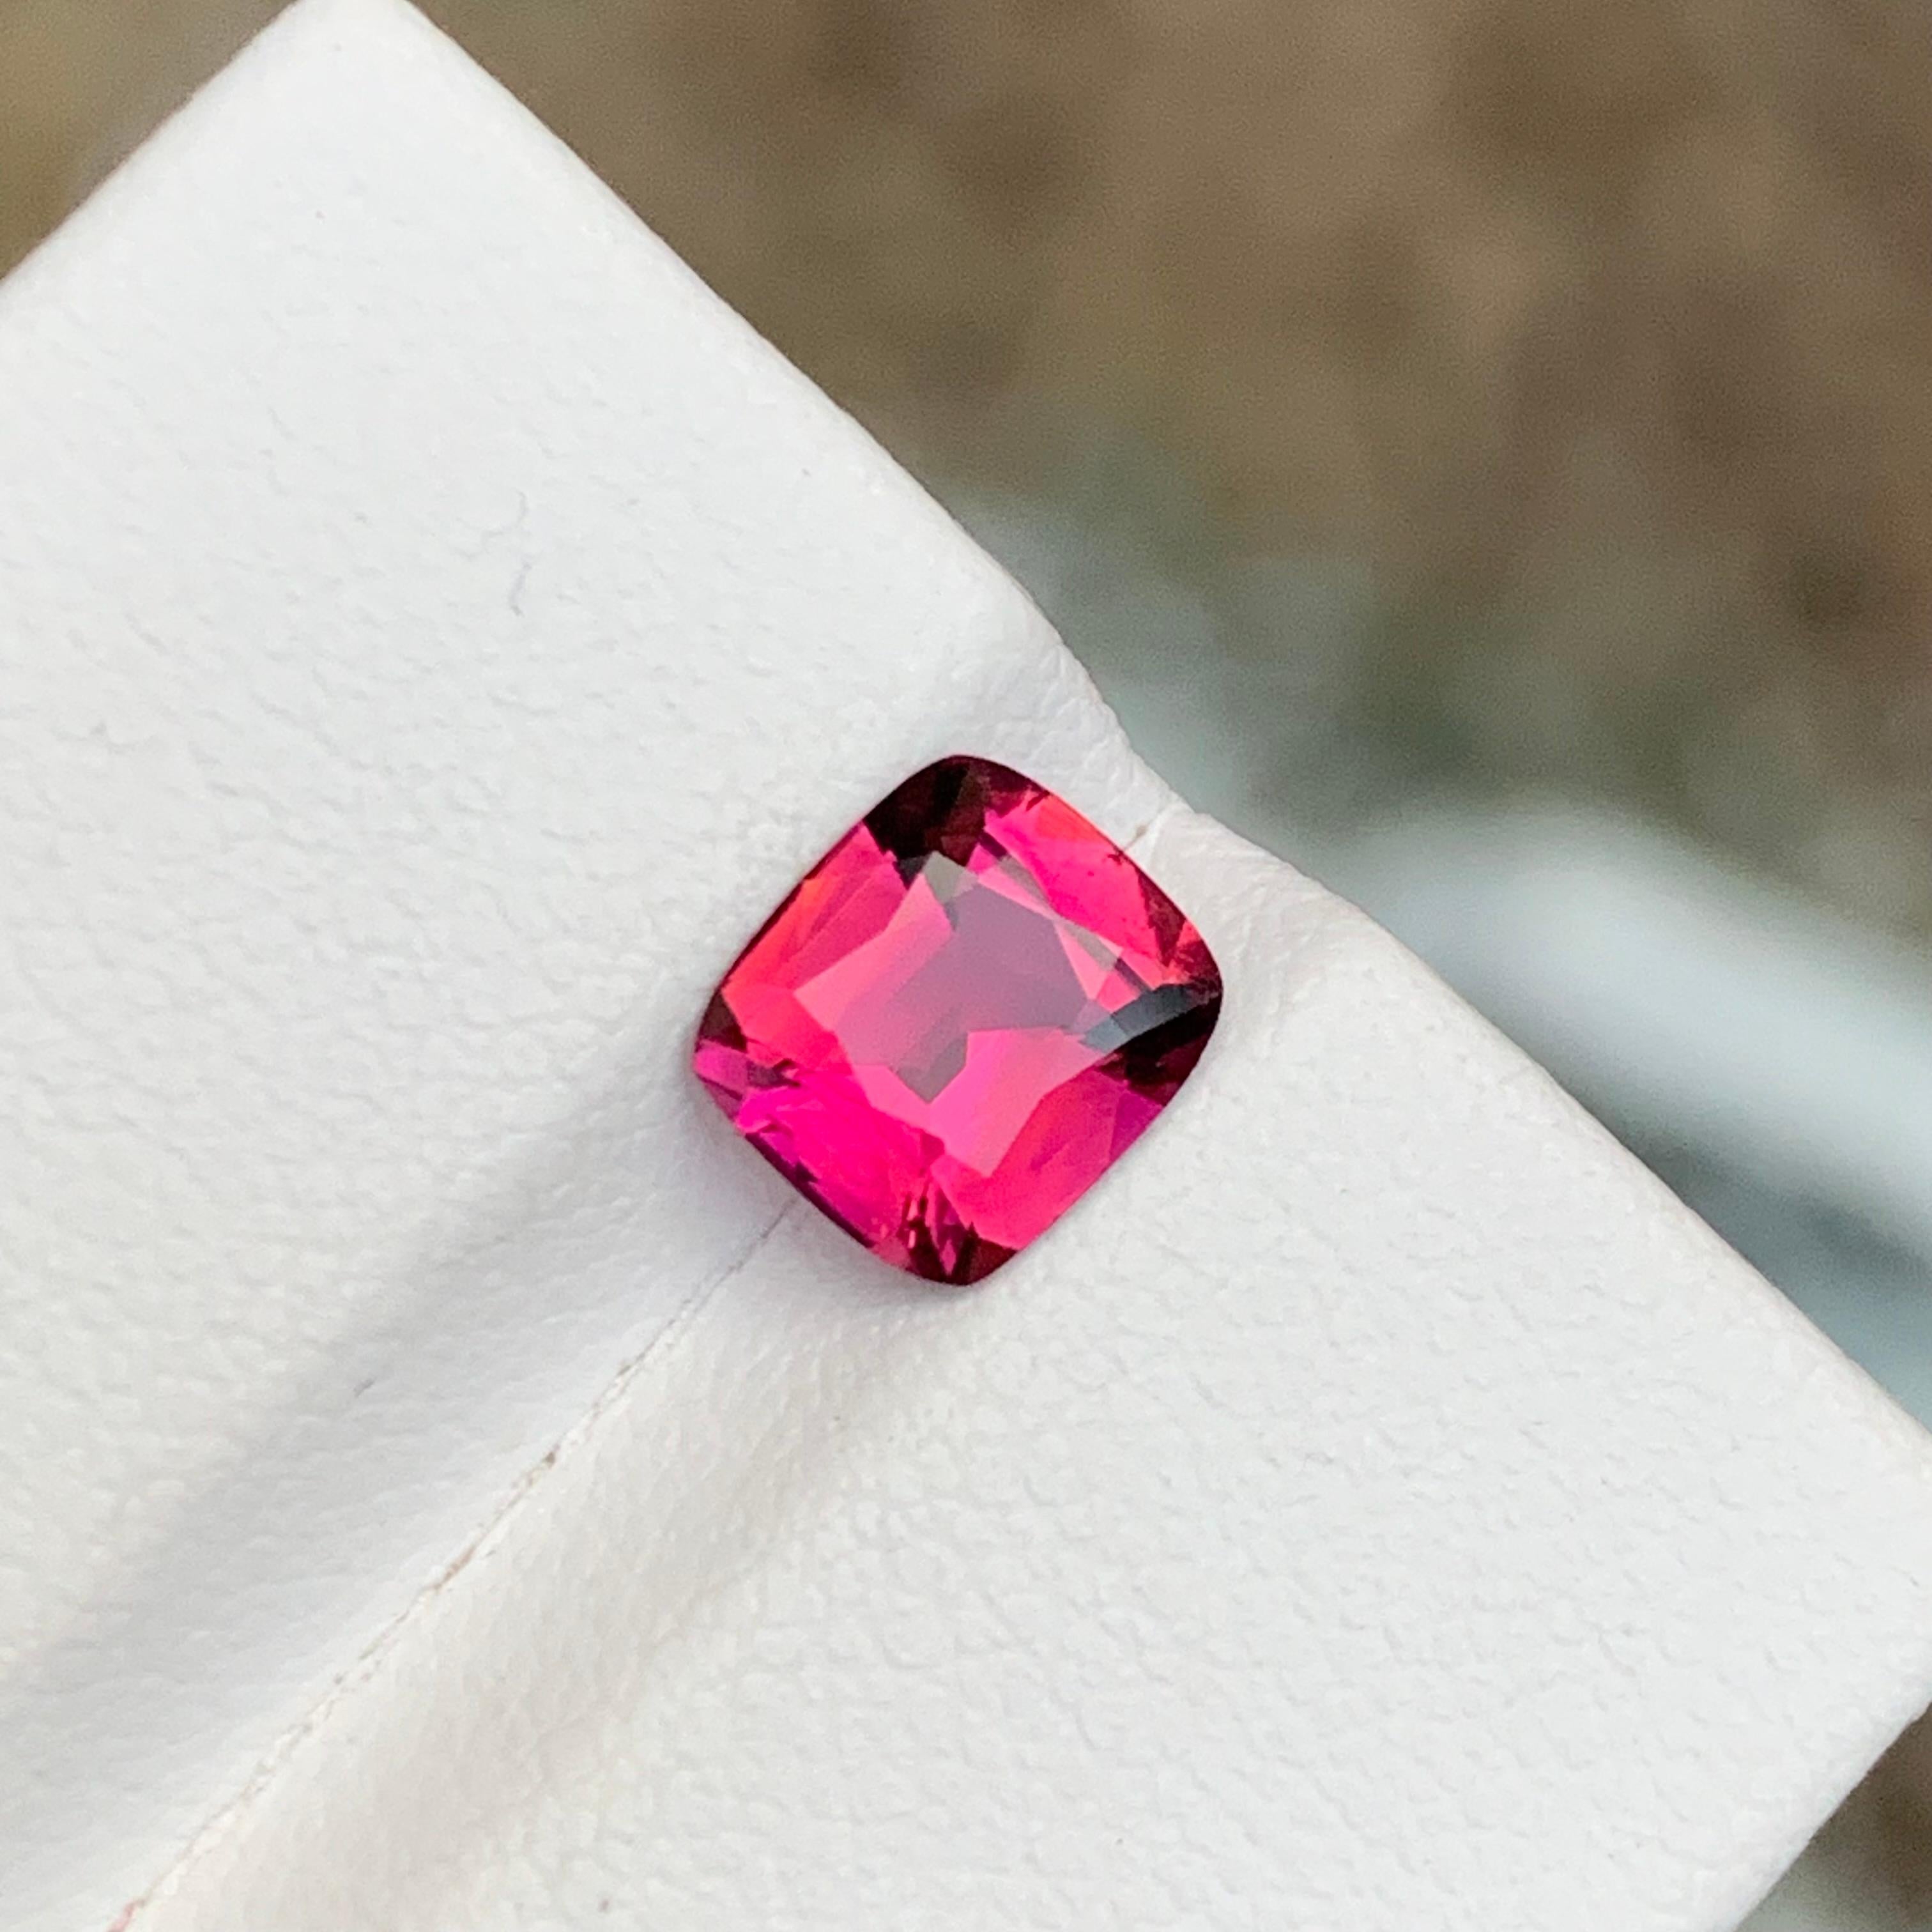 GEMSTONE TYPE: Rubellite Tourmaline
PIECE(S): 1
WEIGHT: 1.20 Carats
SHAPE: Cushion 
SIZE (MM): 7.15 x 6.37 x 3.76
COLOR: Reddish Pink 
CLARITY: Eye Clean
TREATMENT: Heated
ORIGIN: Afghanistan
CERTIFICATE: On demand

Introducing our exquisite 1.20